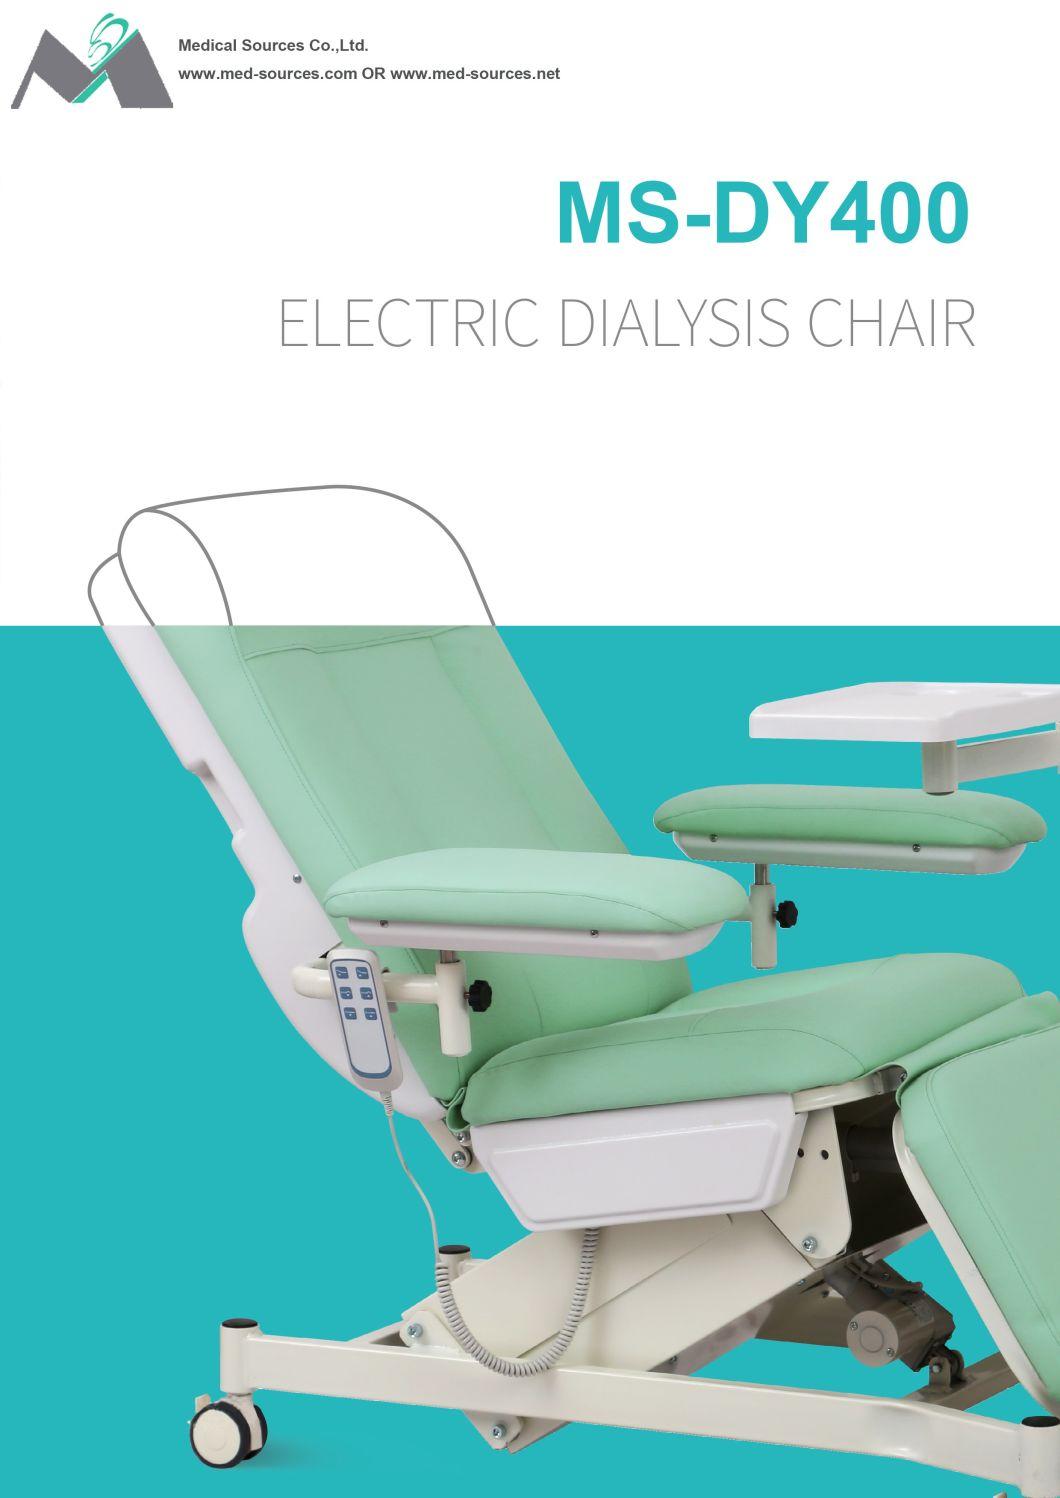 Ms-Dy400 Multi Position Medical Electric Dialysis Chair